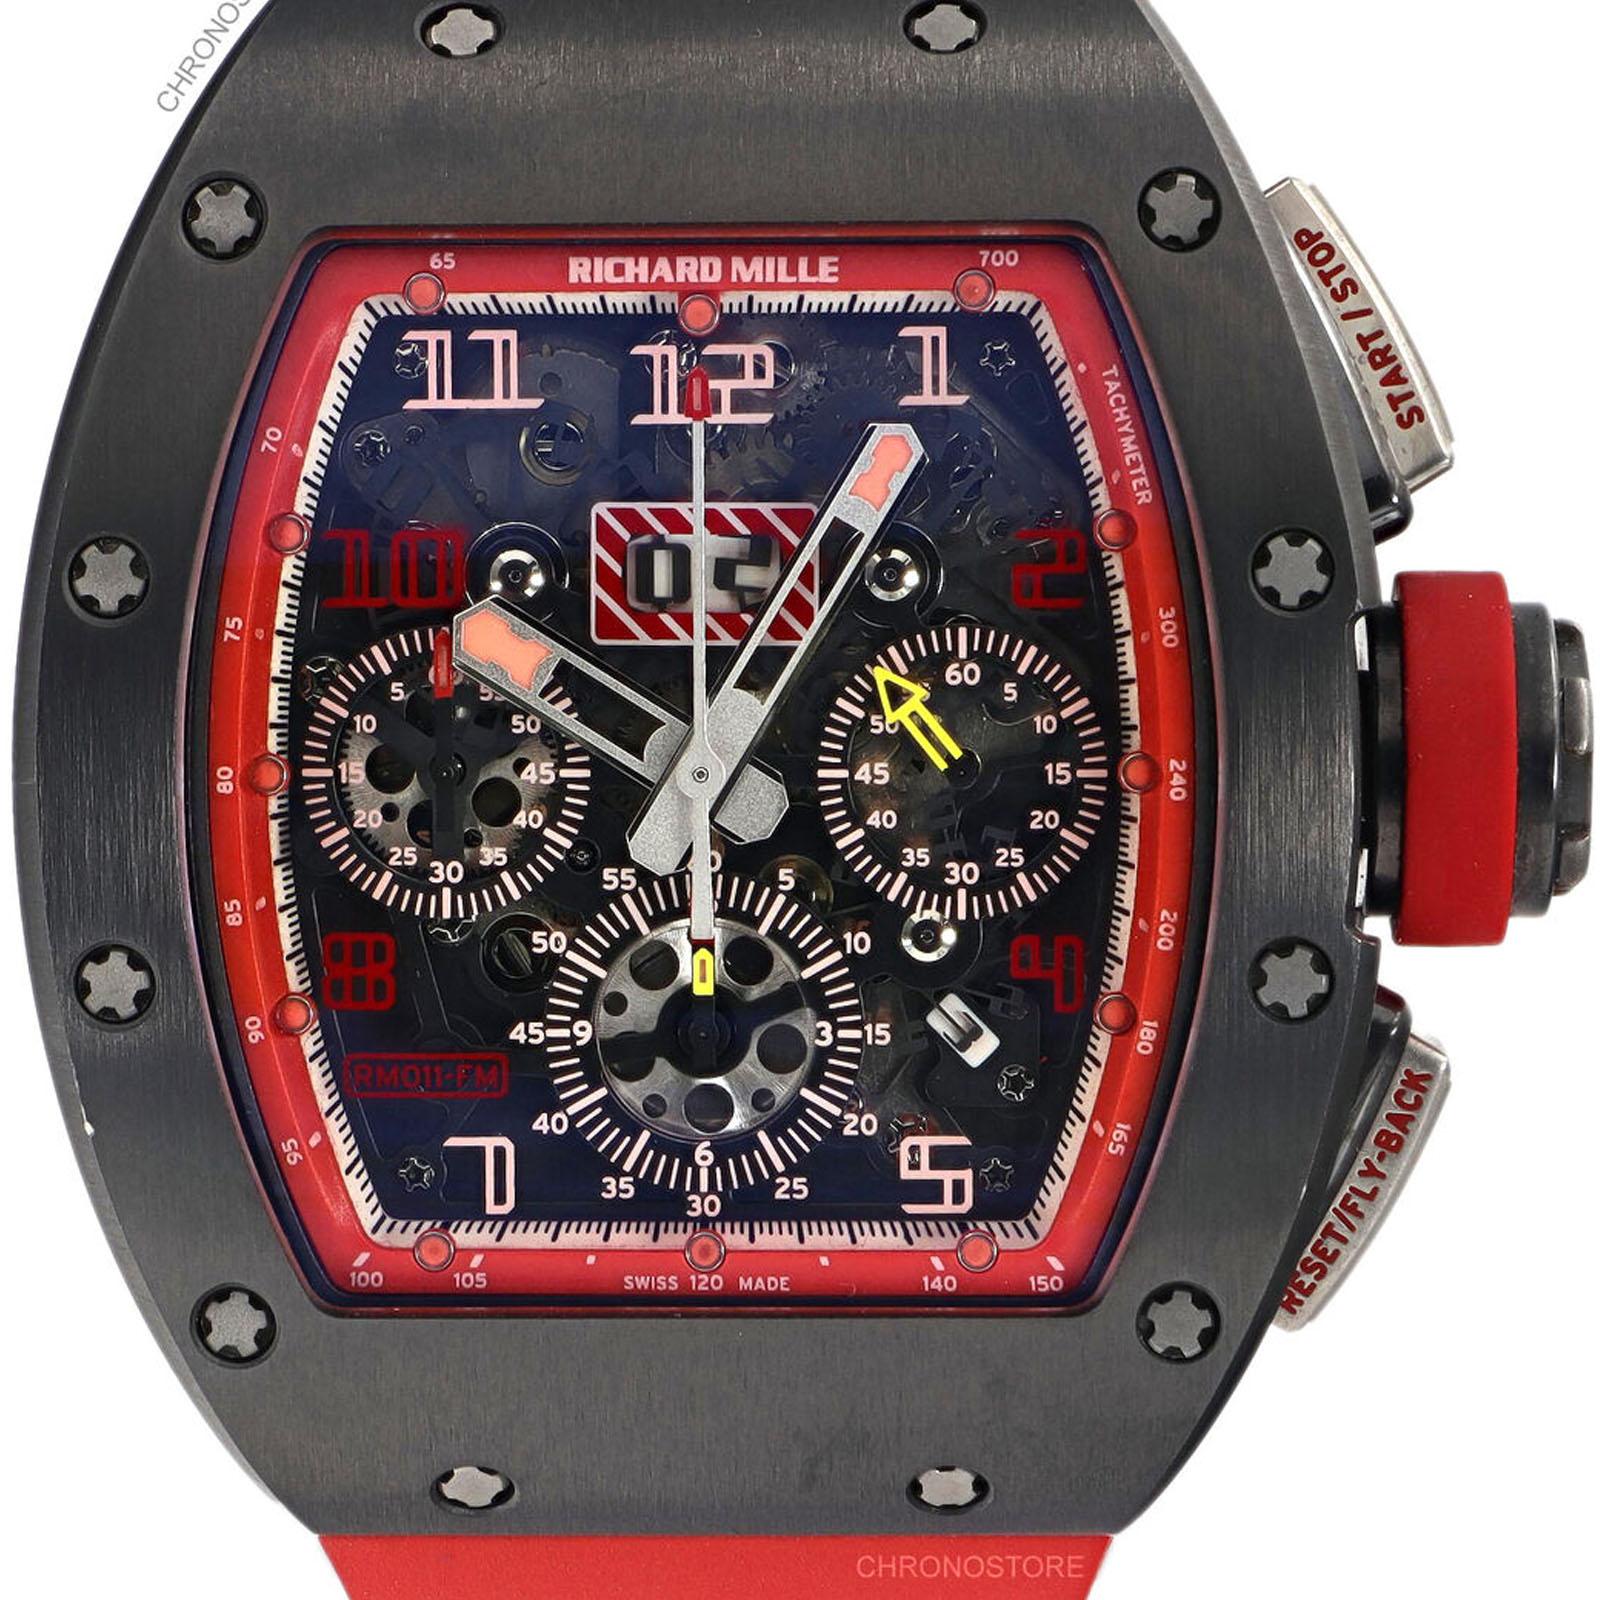 This pre-owned Richard Mille Felipe Massa RM011 is a beautiful men's timepiece that is powered by an automatic movement which is cased in a titanium case. It has a tonneau shape face, chronograph, date, small seconds subdial, tachymeter dial and has